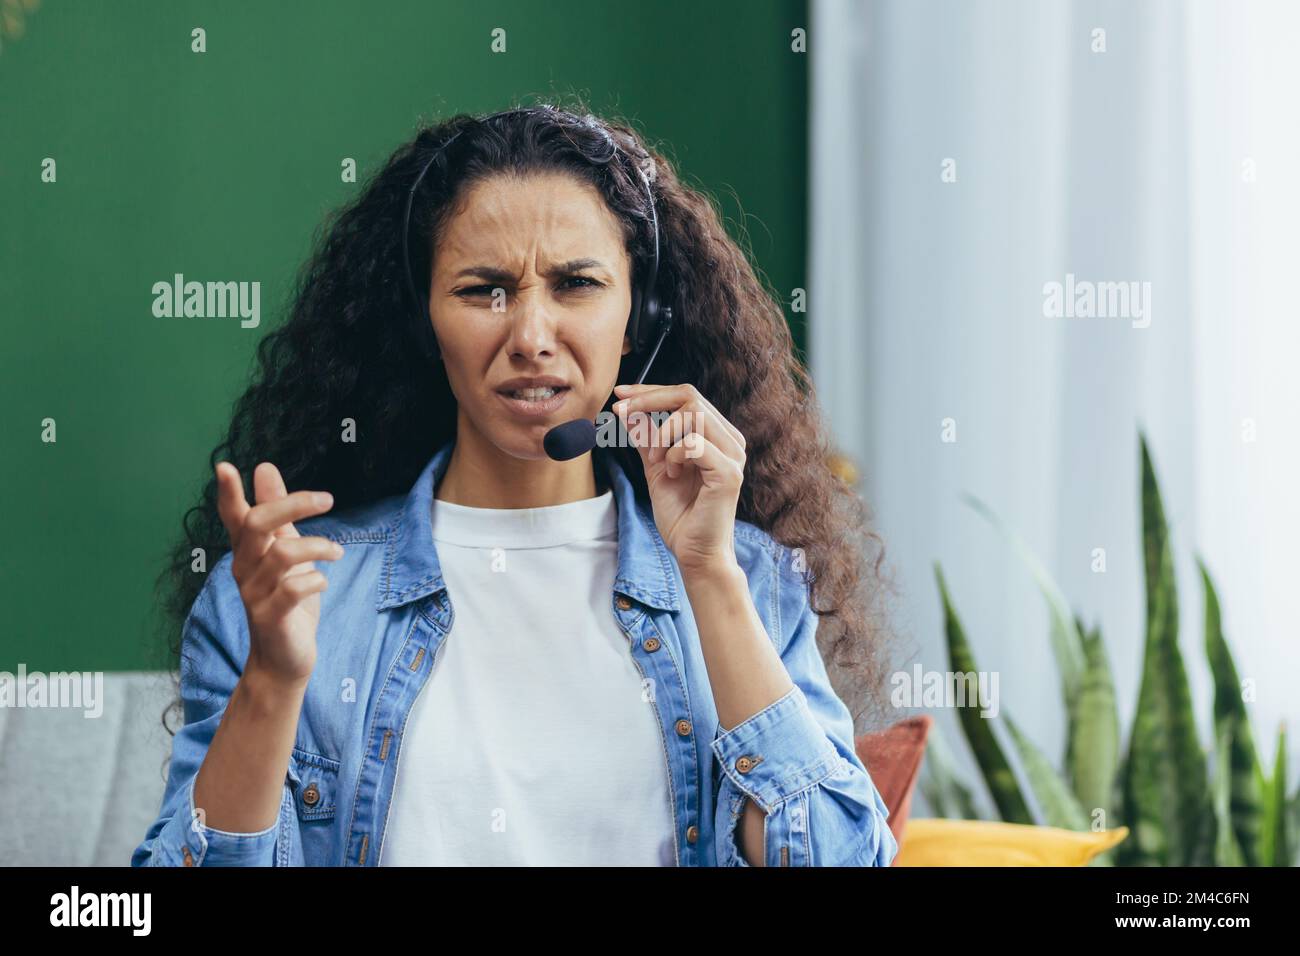 Portrait of angry woman with headset at home, Hispanic woman working remotely as consultant, looking displeased at camera video call online consultation.. Stock Photo